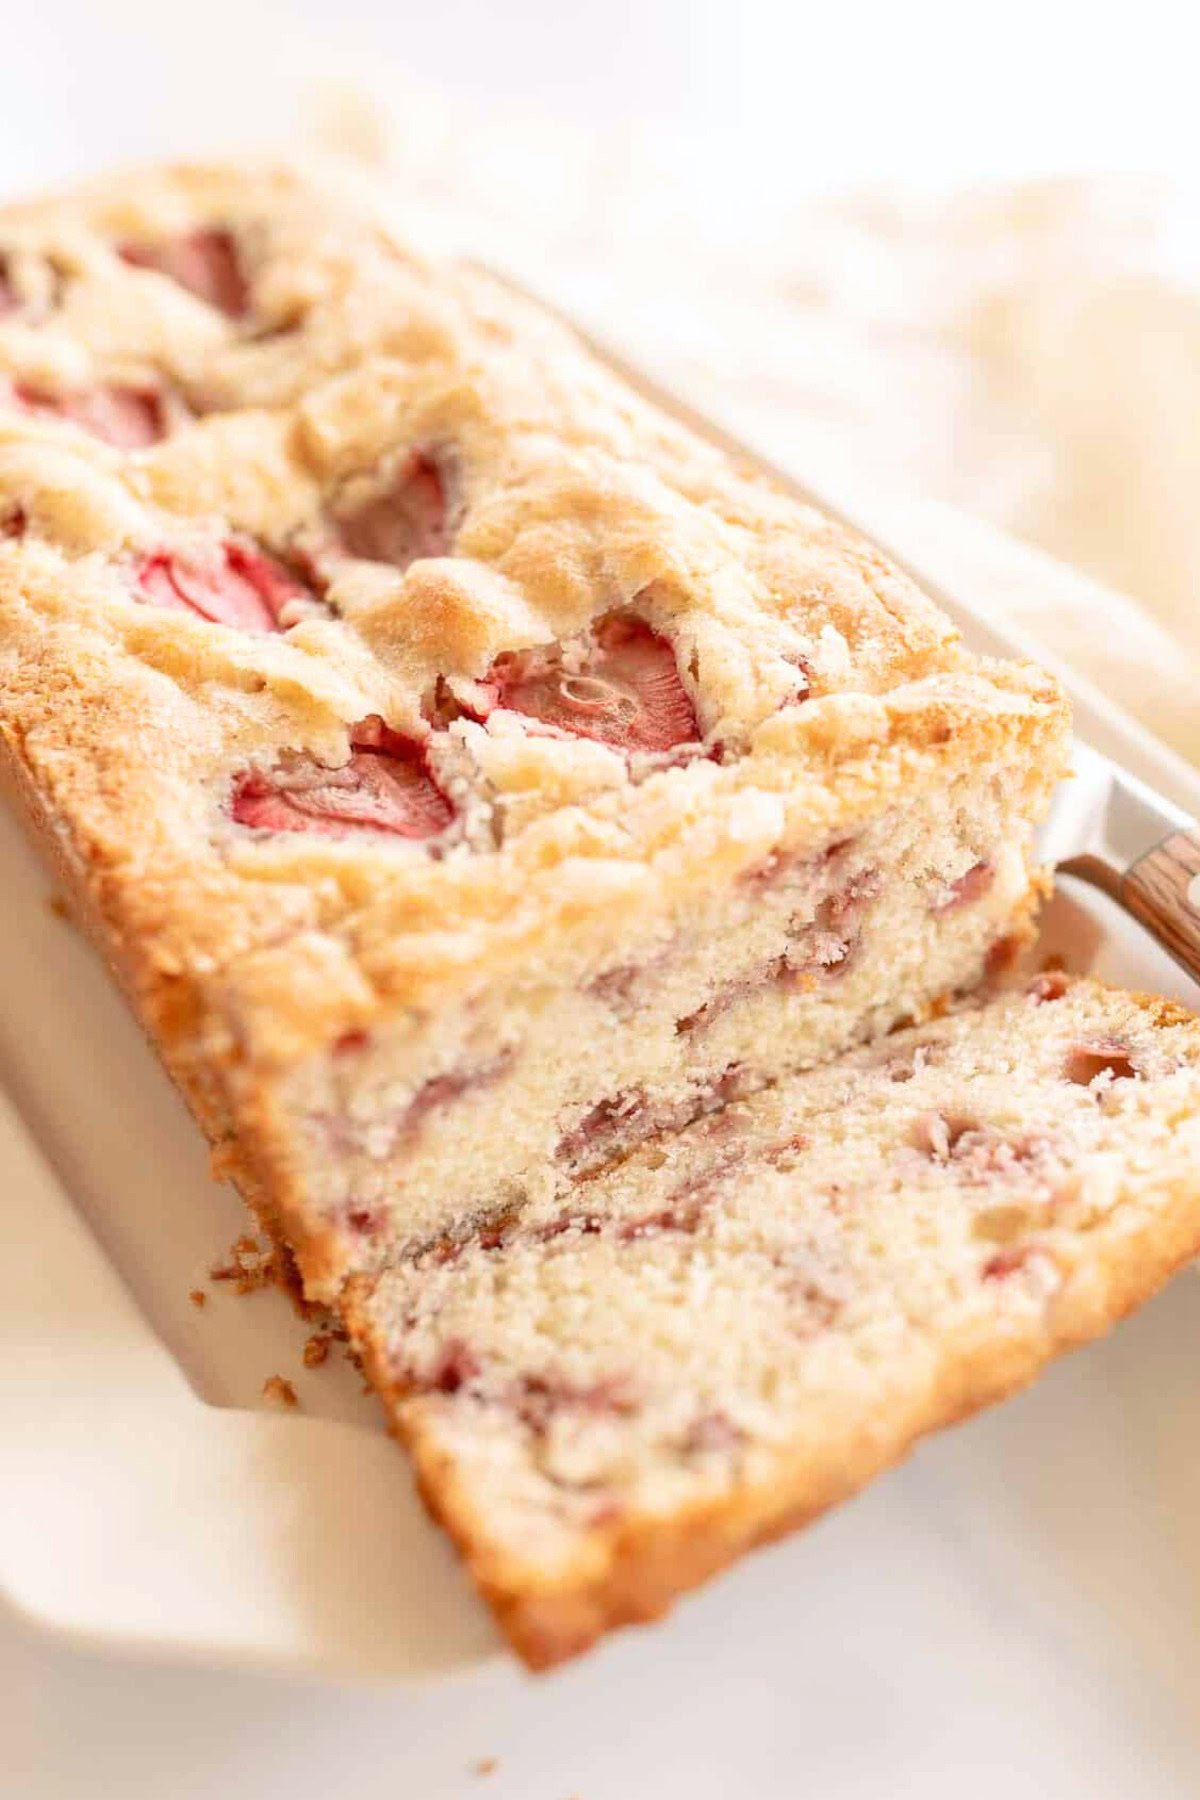 A close-up of a sliced loaf of strawberry bread, showcasing the moist interior with visible pieces of strawberries. The delectable strawberry bread is placed on a white surface, inviting you to try this delightful strawberry bread recipe.